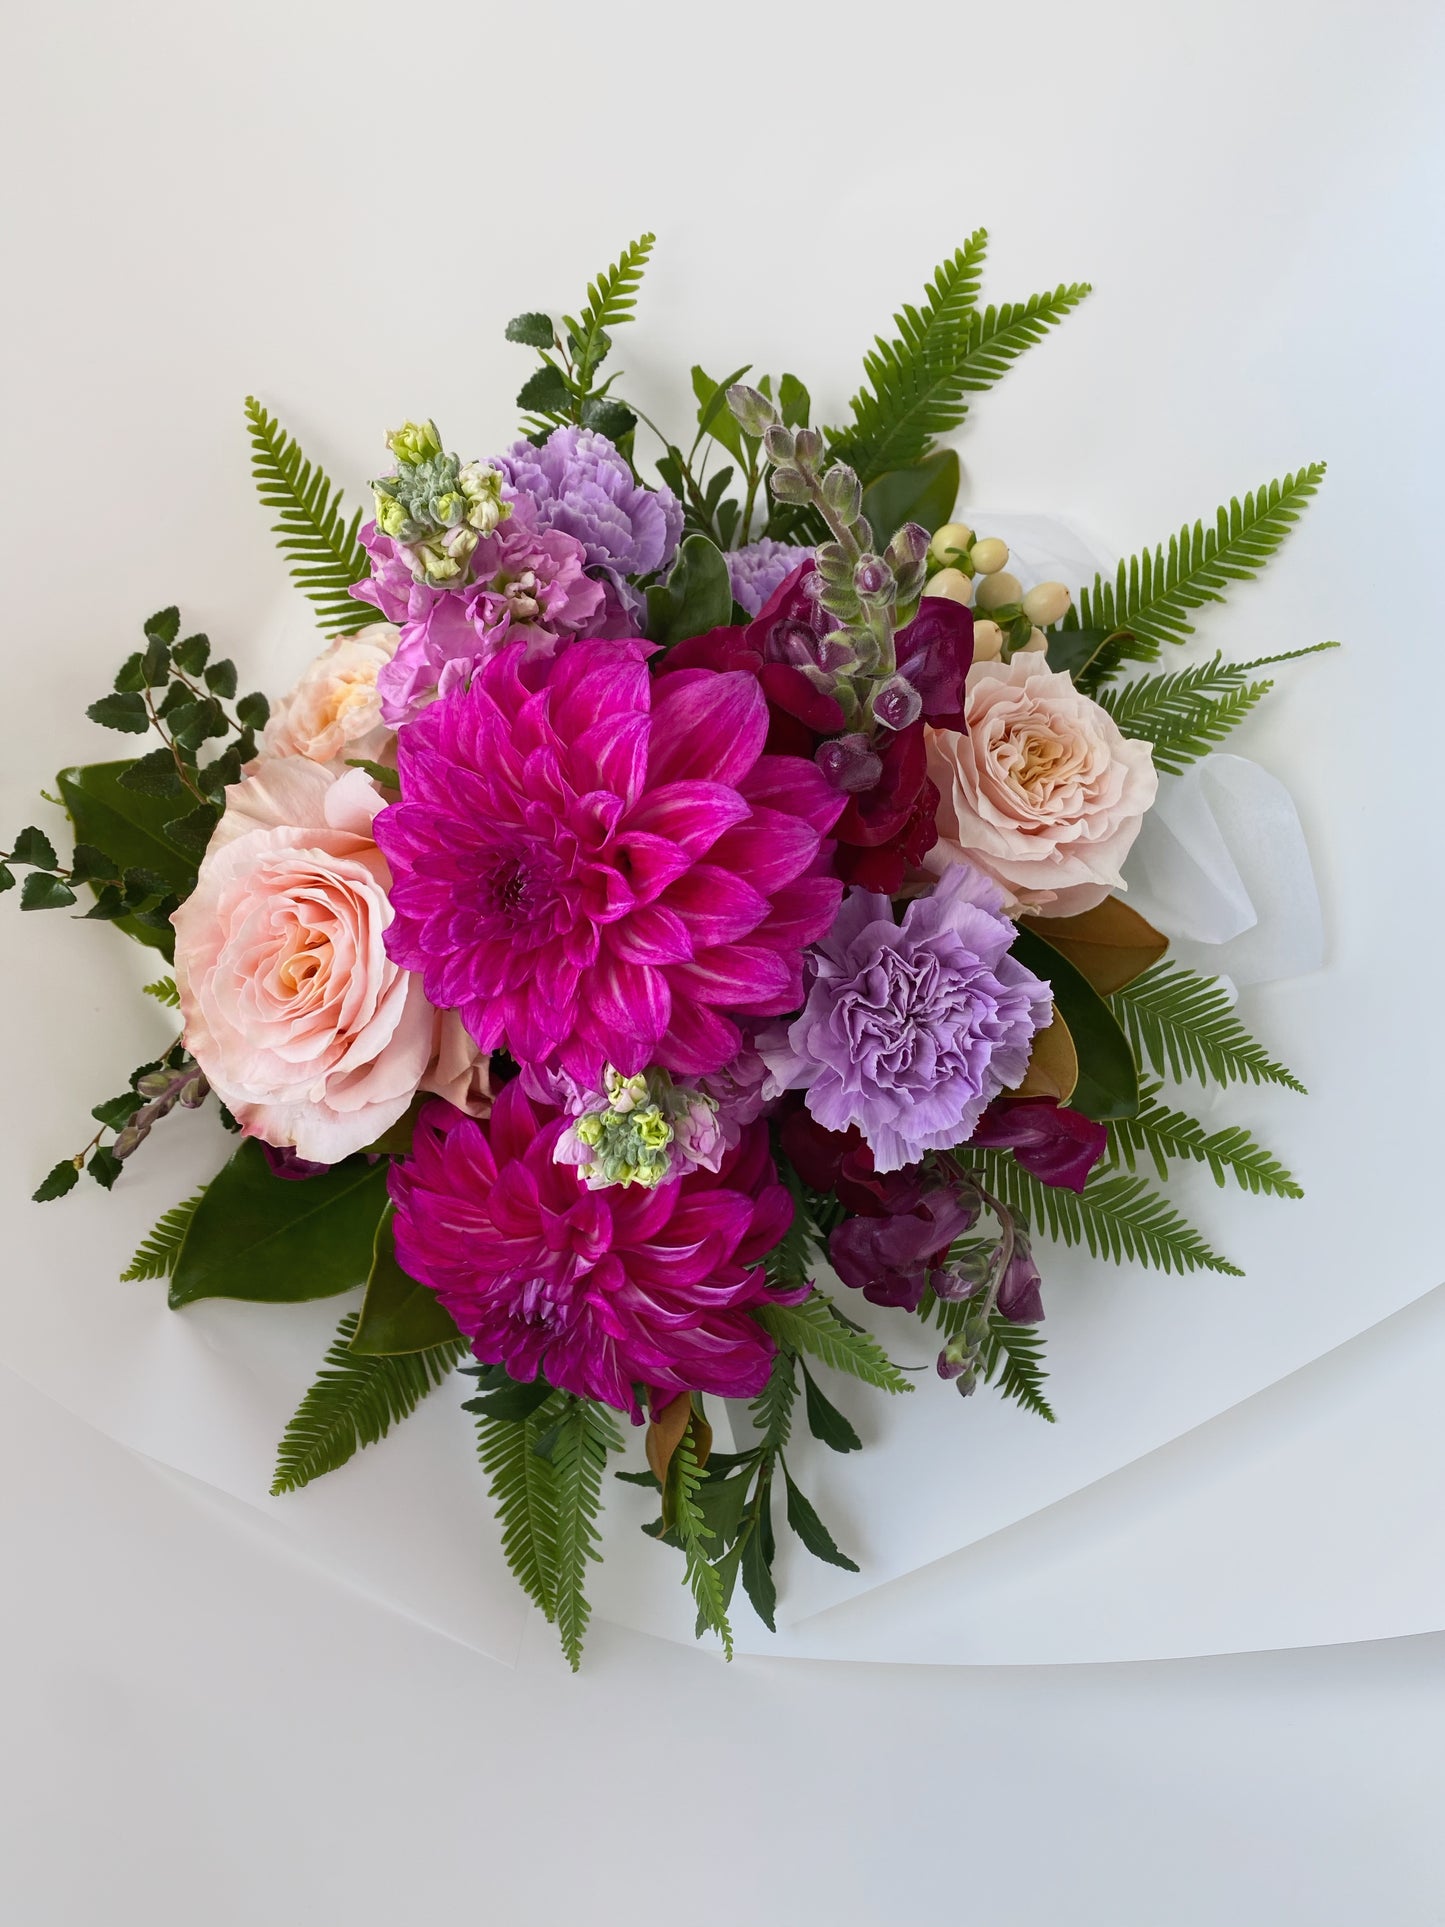 Fresh posy florist bouquet. Same day delivery available Hobart Tasmania